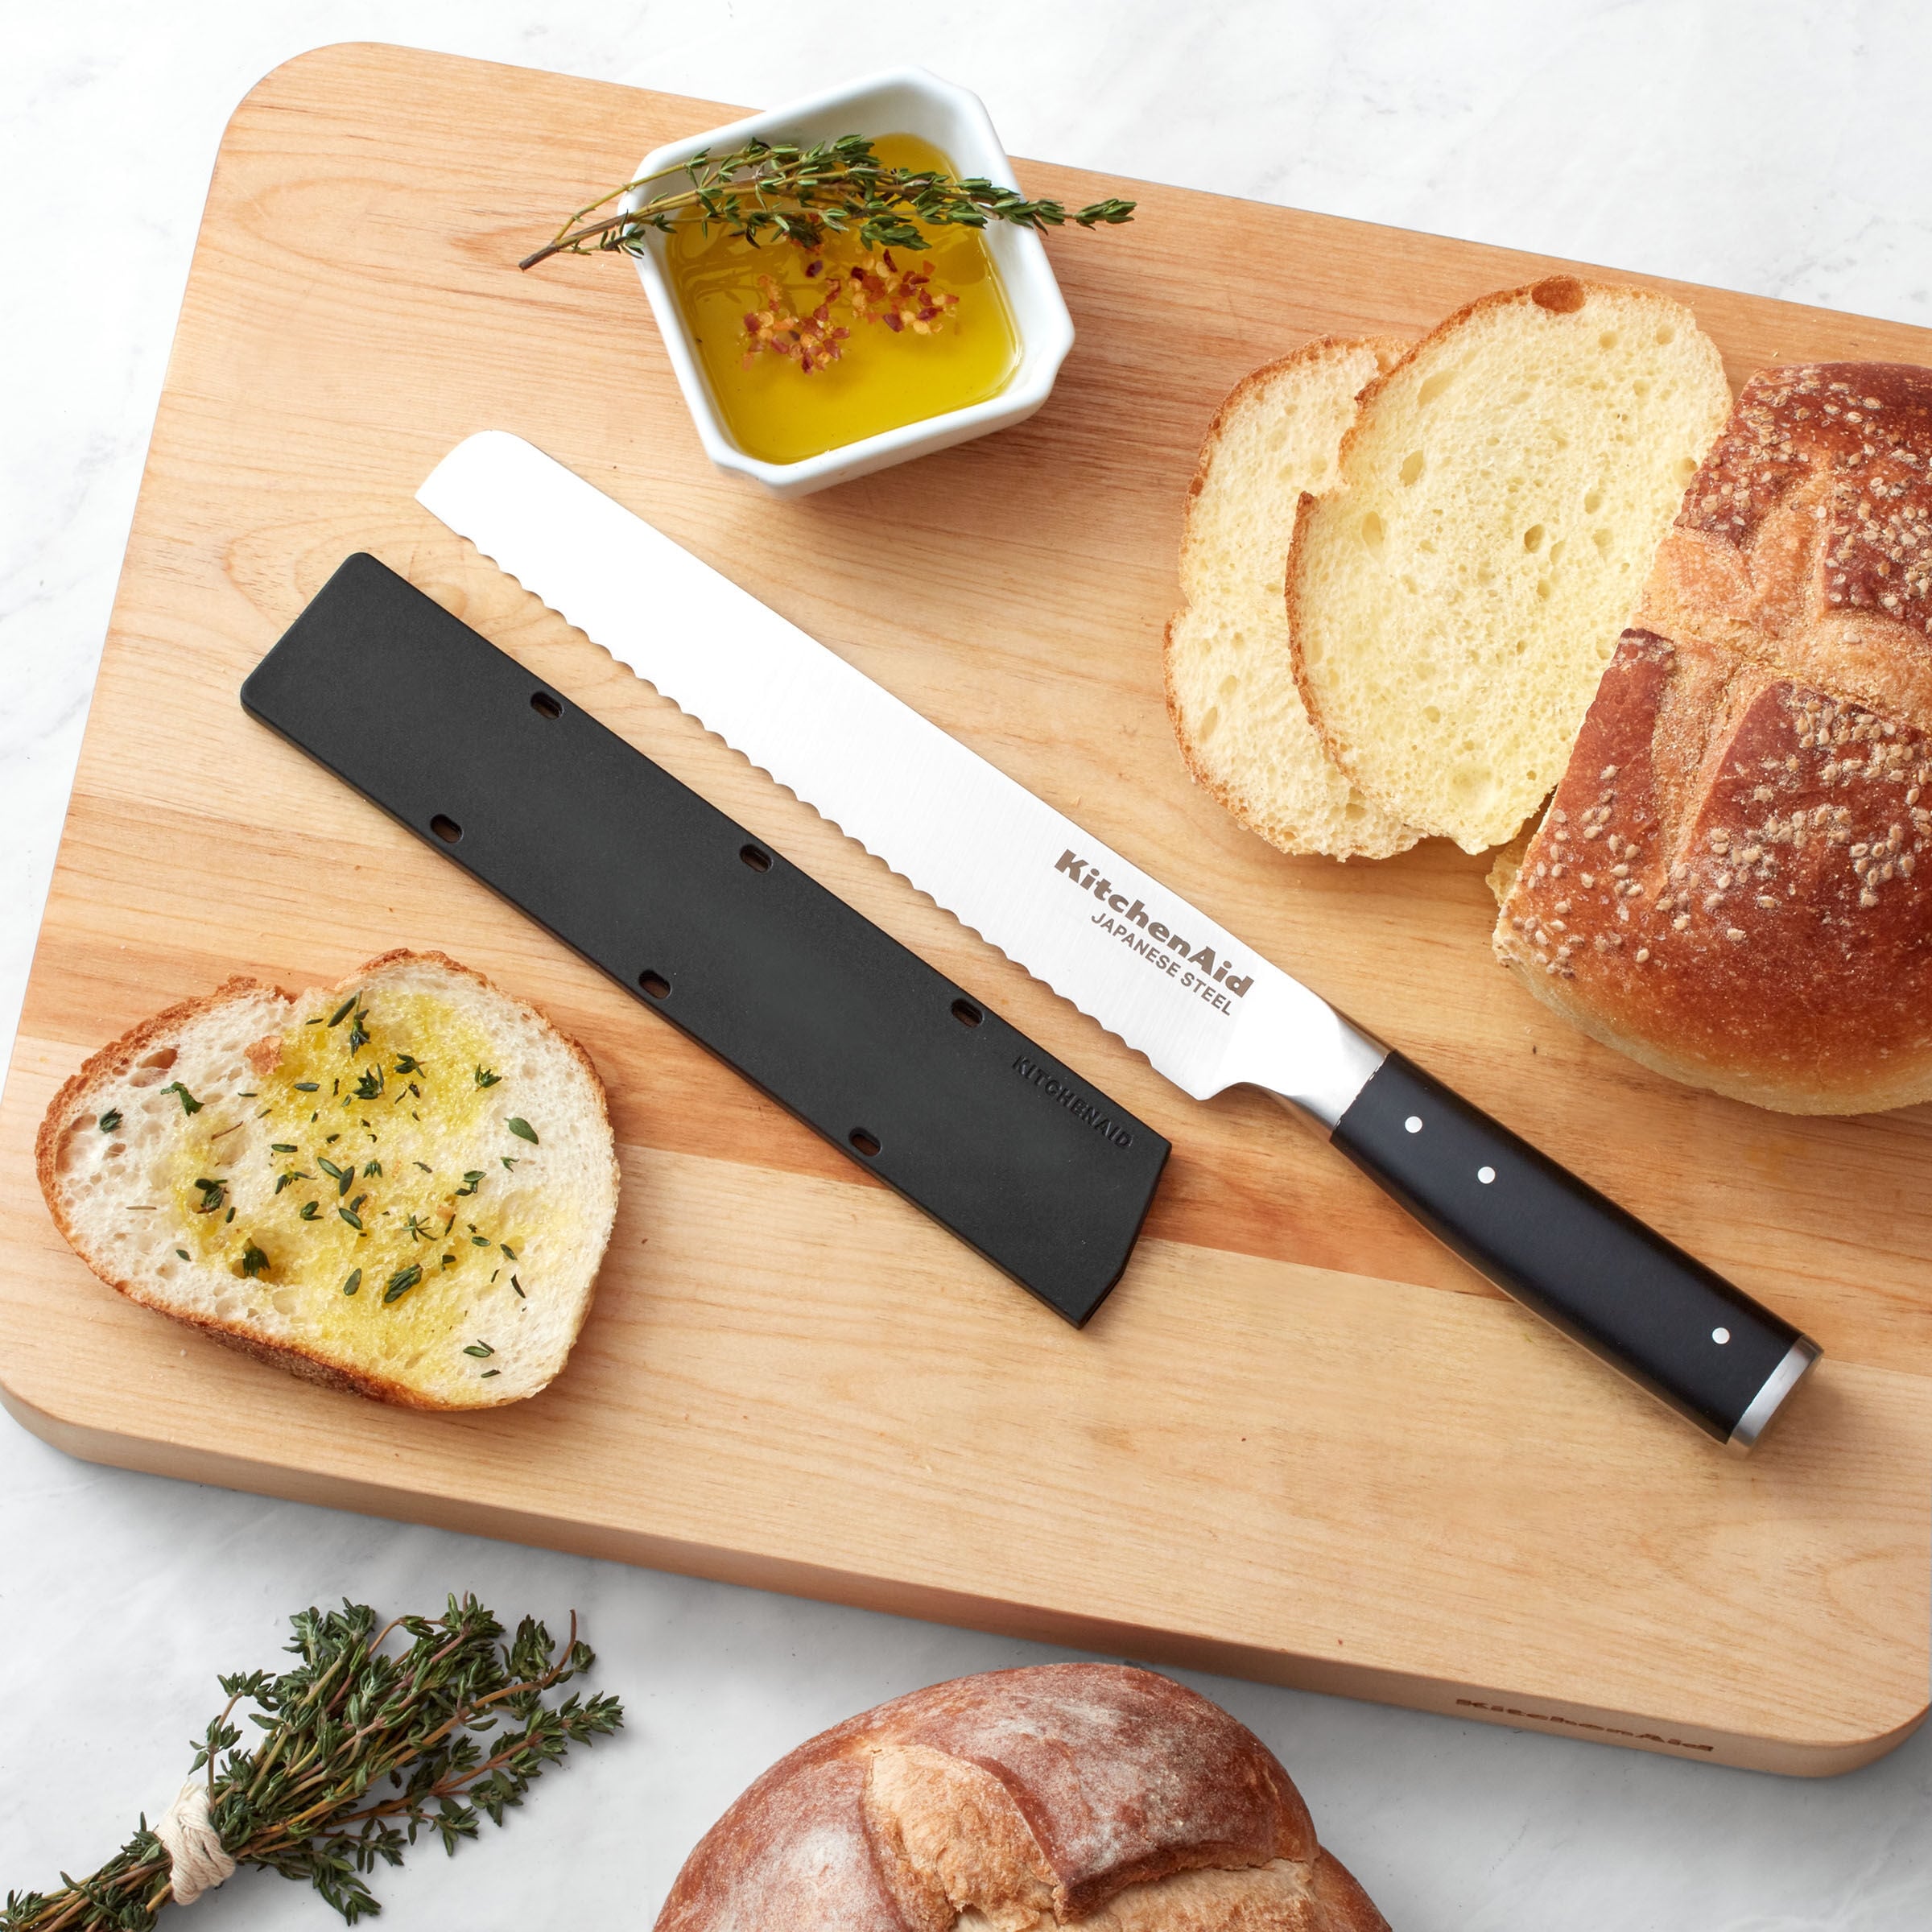 https://ak1.ostkcdn.com/images/products/is/images/direct/a31a81c3b2e843a8ea97f6fb3423fcef12c2e48a/KitchenAid-Gourmet-Forged-Bread-Knife%2C-8-Inch%2C-Black.jpg